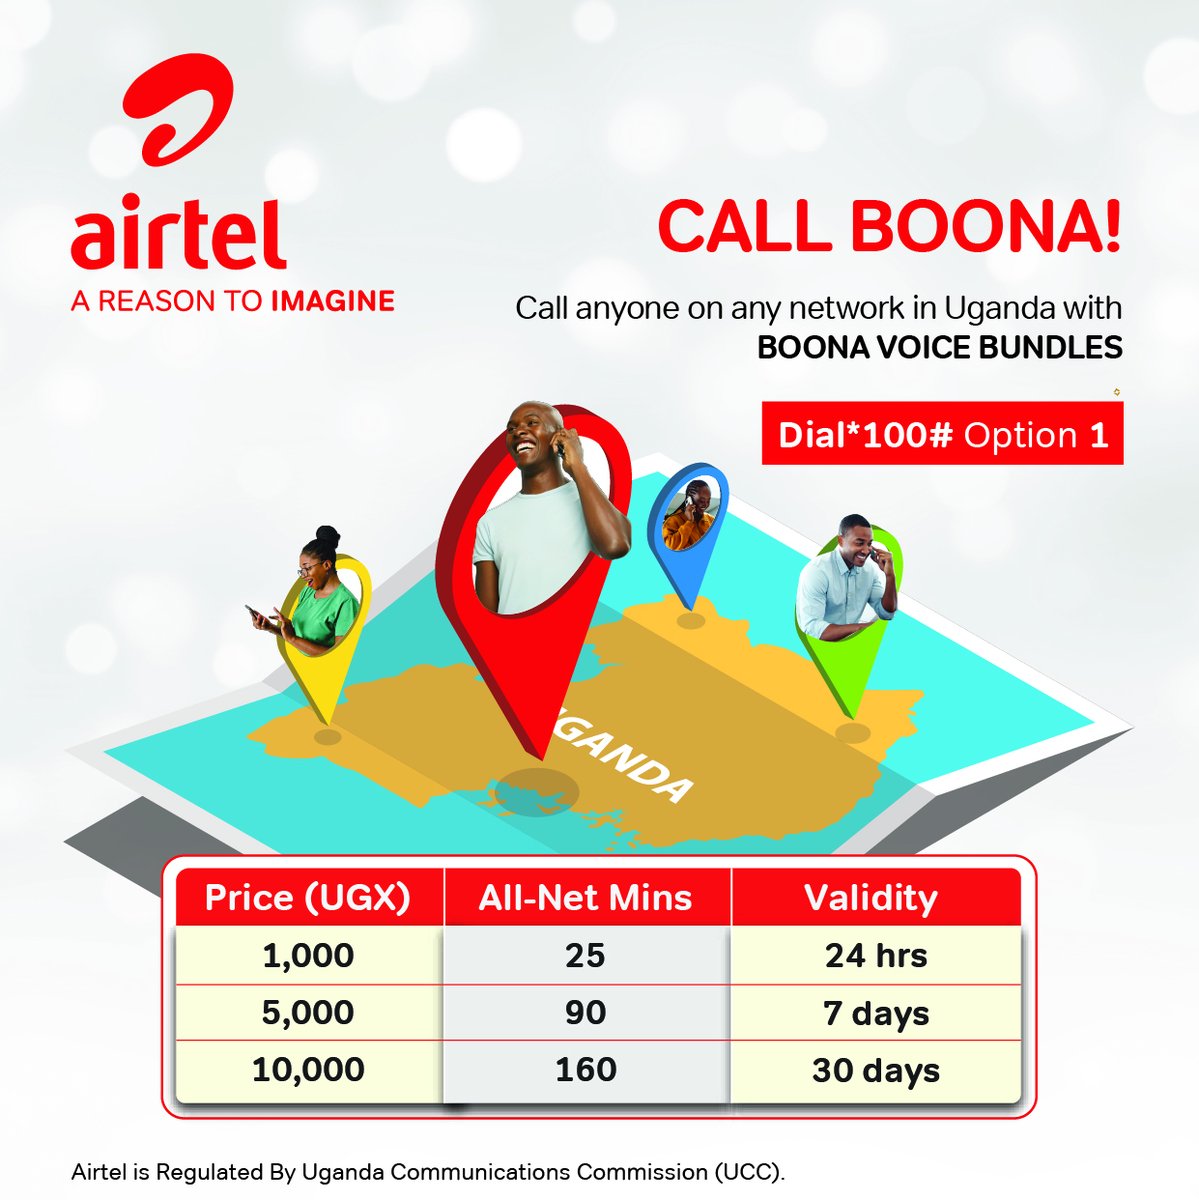 With #CallBoona bundles, cross-network calls are now easier, and hustle free. Dial *100#, select option 1 to stay connected. You can also use the #MyAirtelapp here; airtelafrica.onelink.me/cGyr/qgj4qeu2